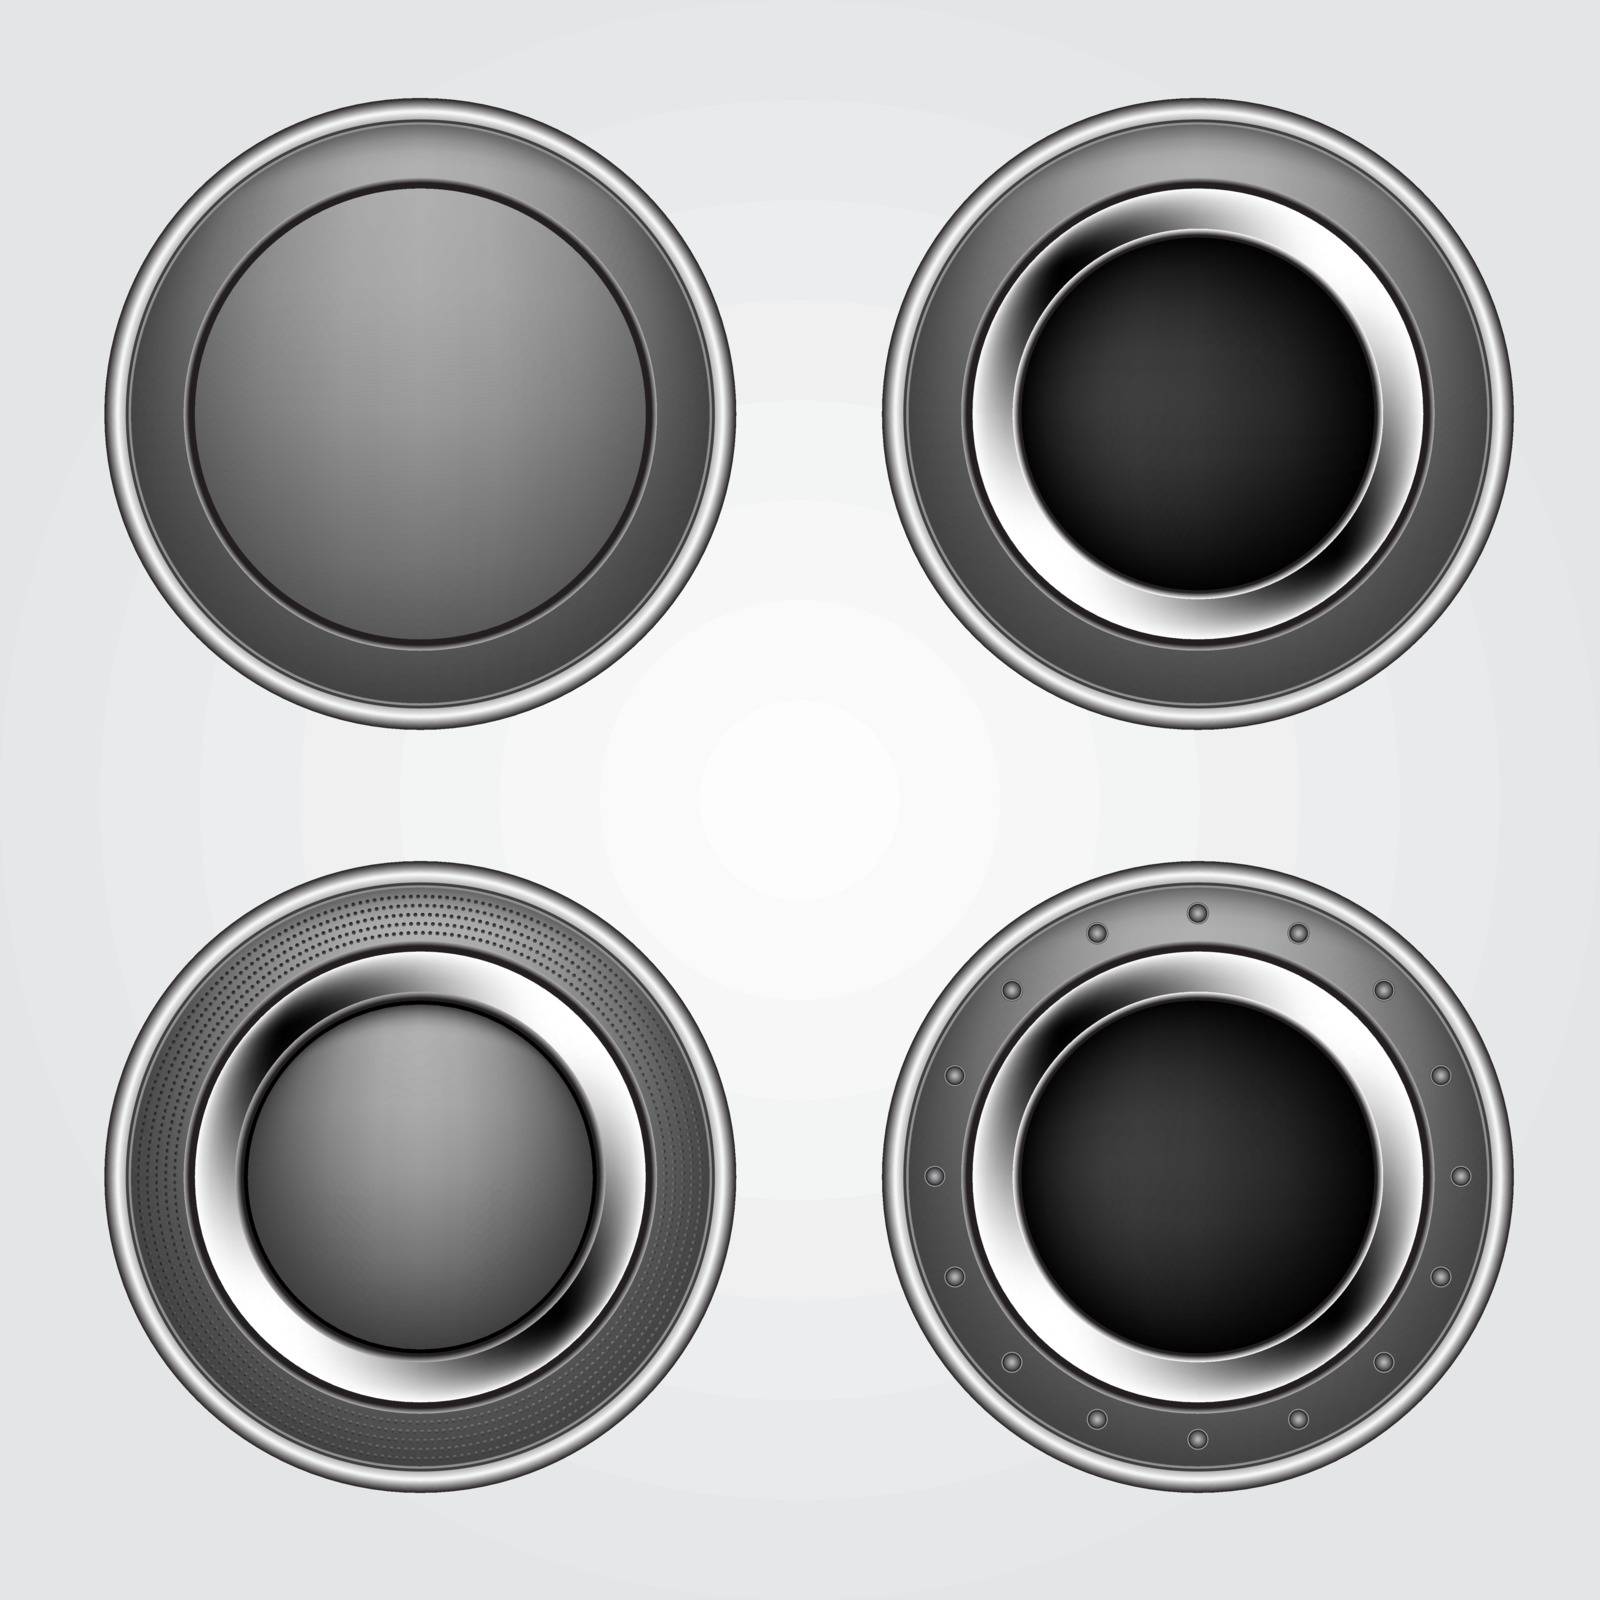 shiny metal button, four kinds of gray